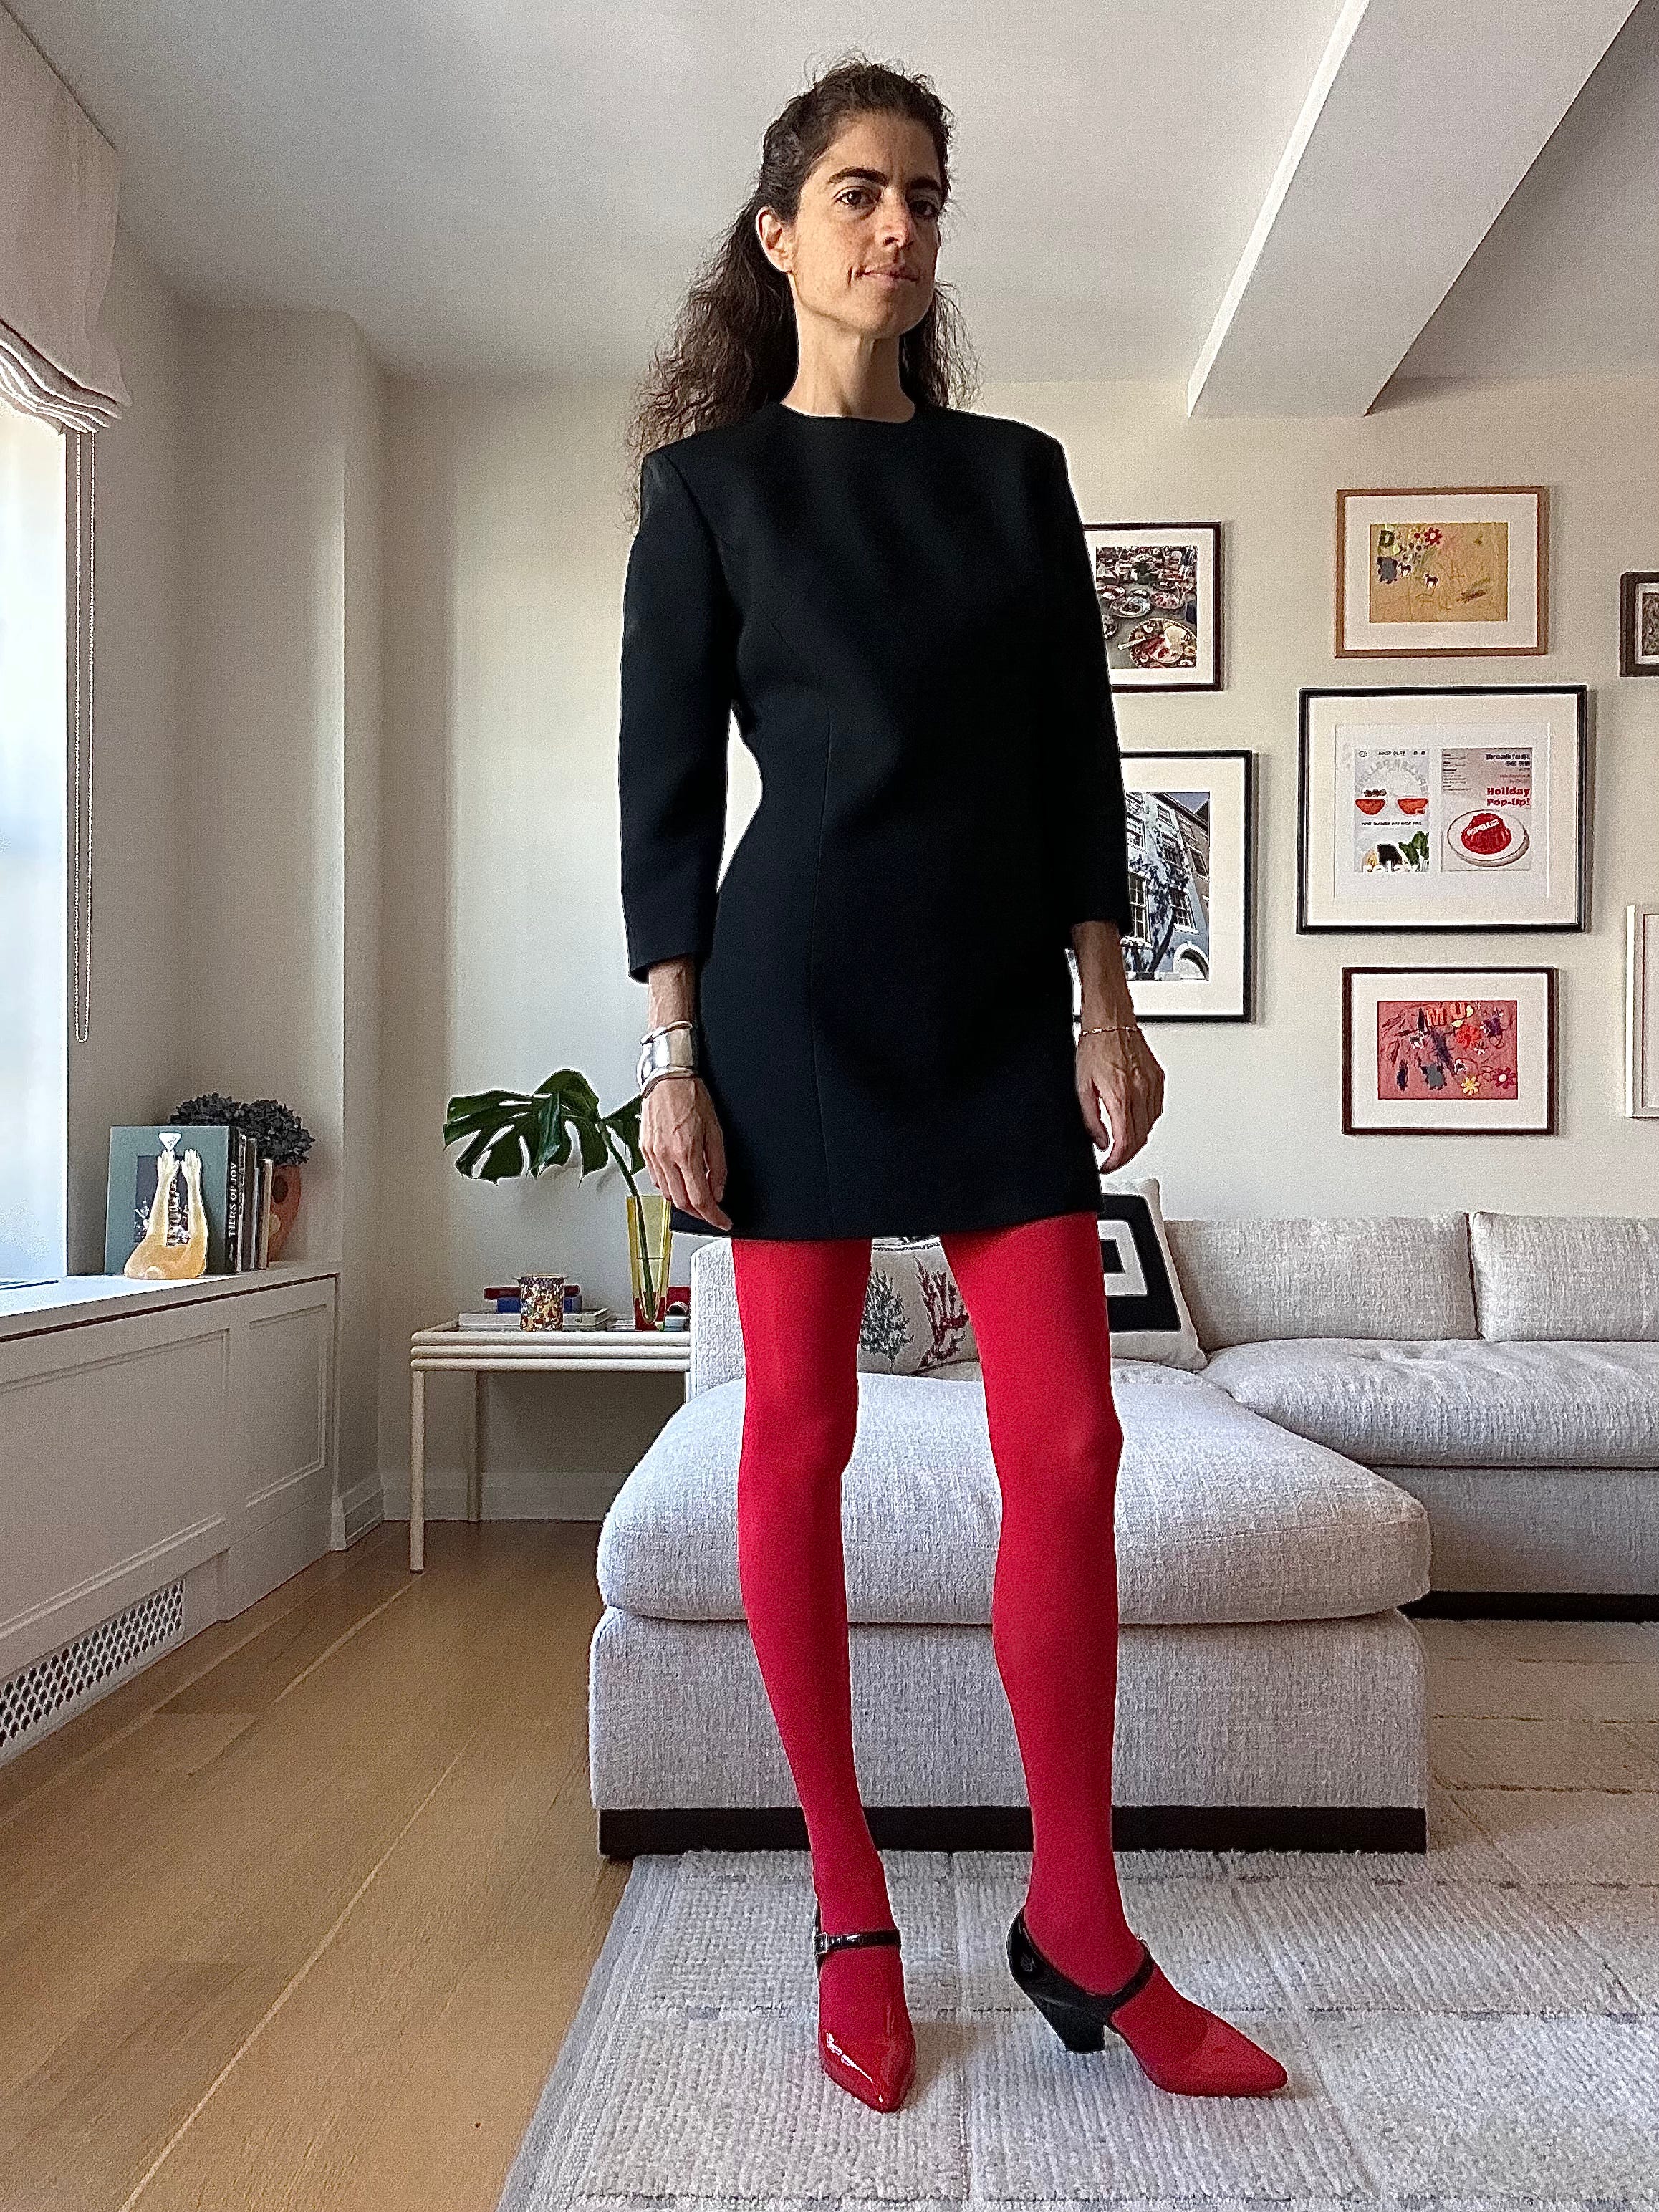 What does a red accent do for your outfit?